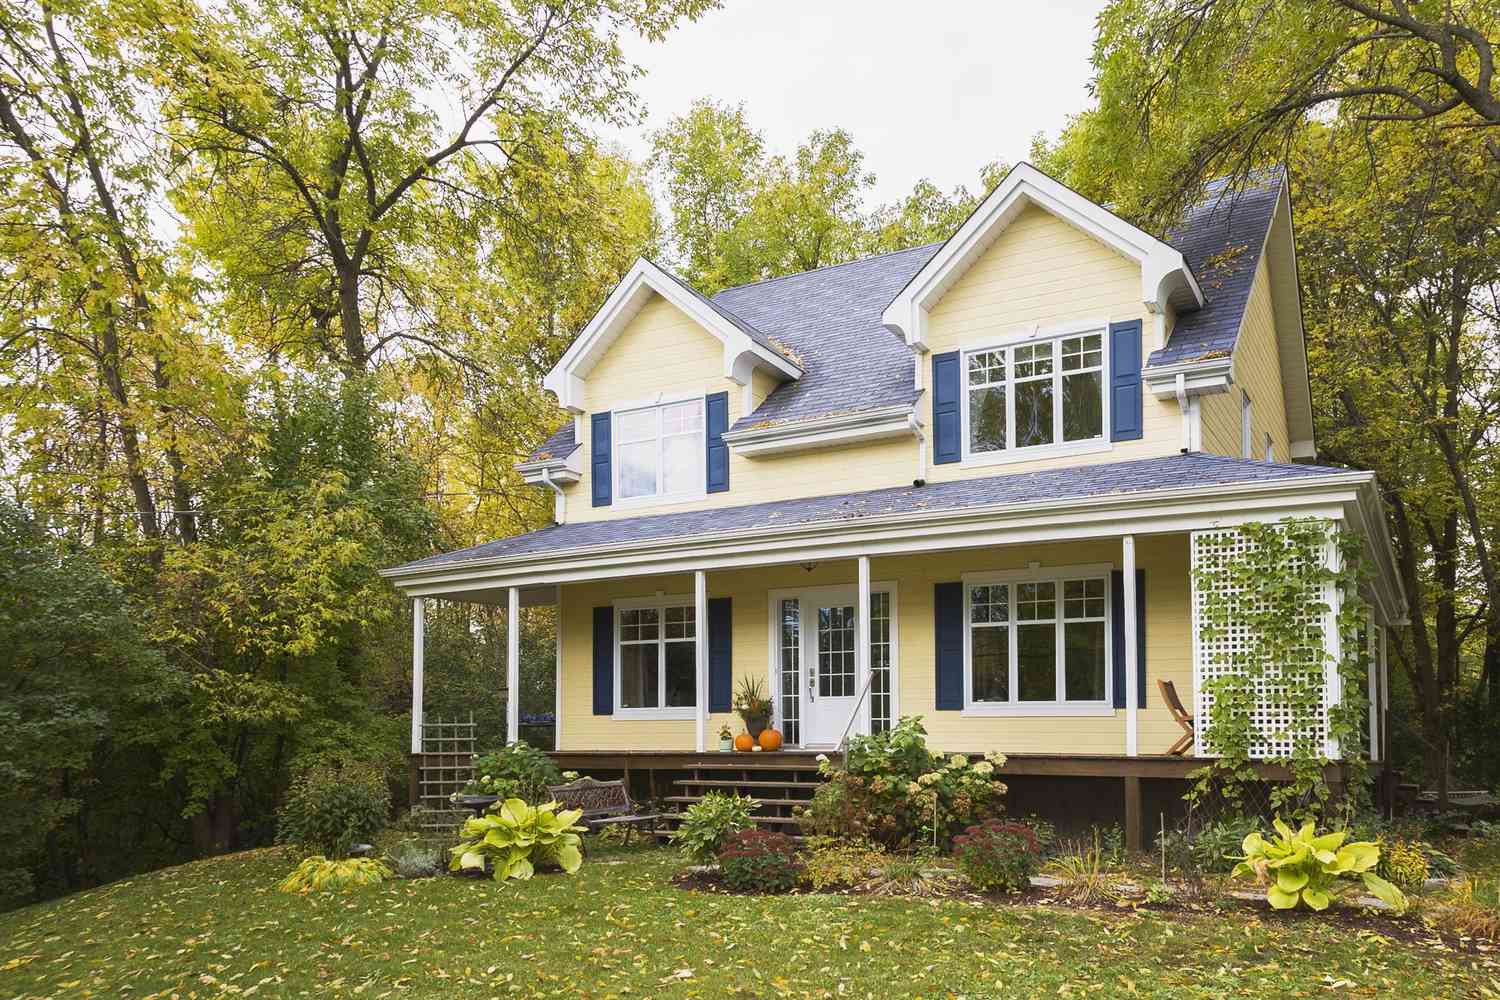 Yellow clapboard with blue and white trim cottage style home facade in autumn